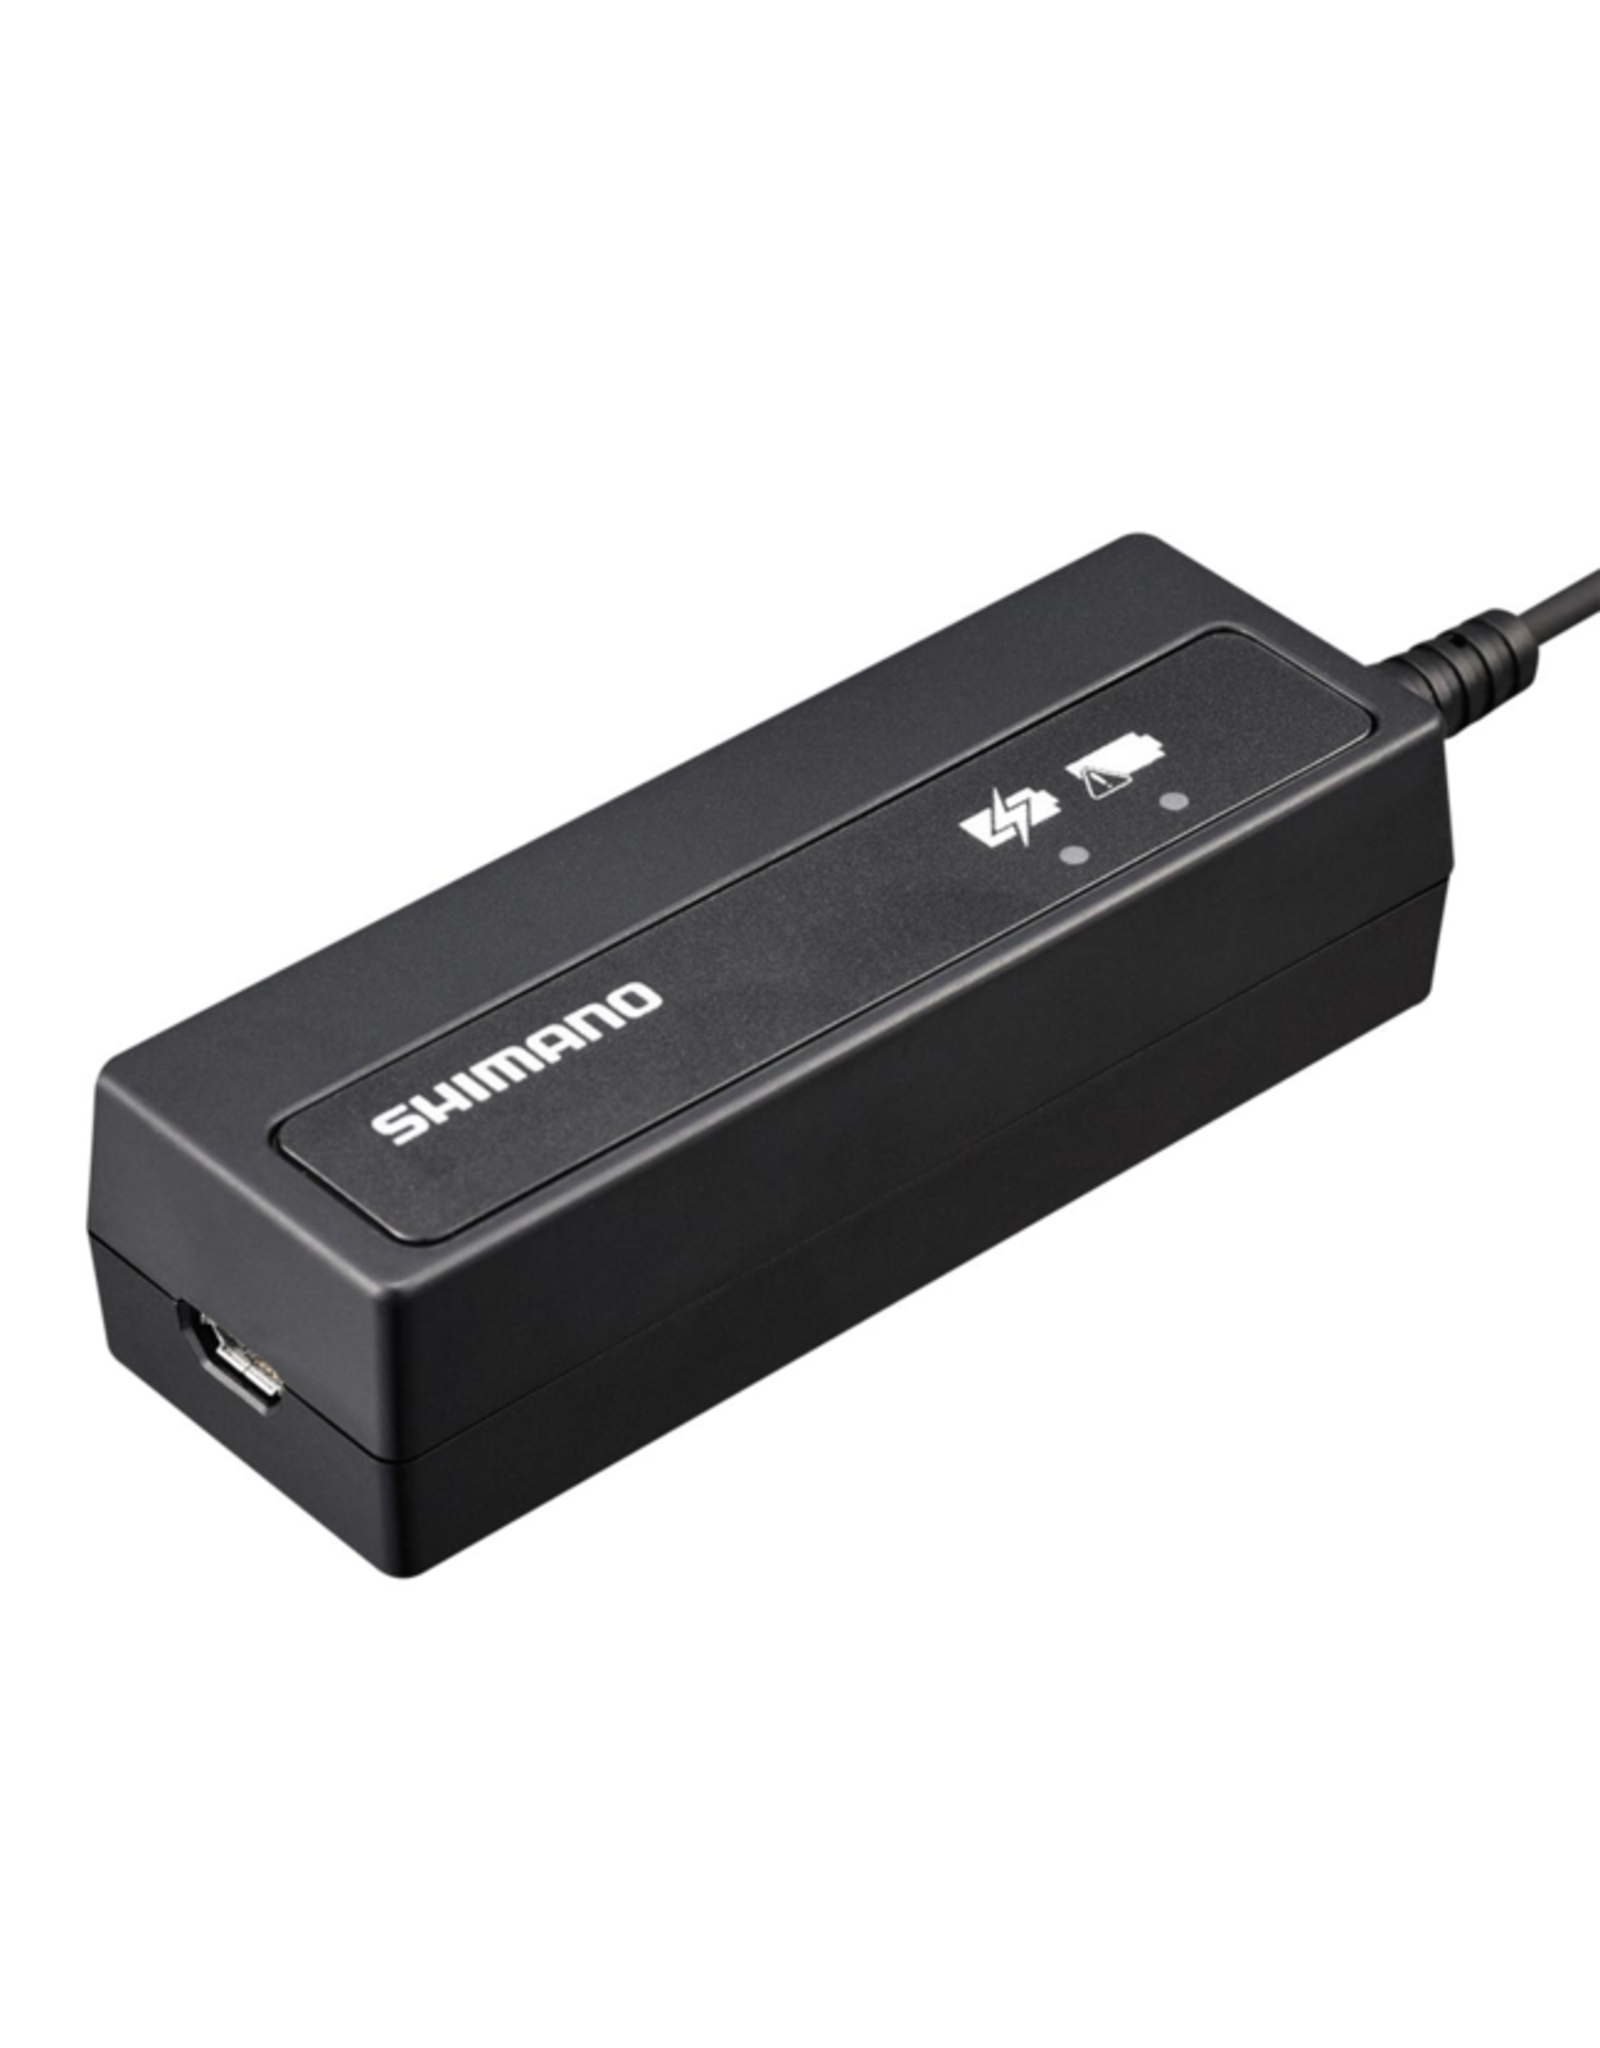 Shimano Battery Charger Shimano SM-BCR2 For SM-BTR2 Internal Battery Includes USB Cable